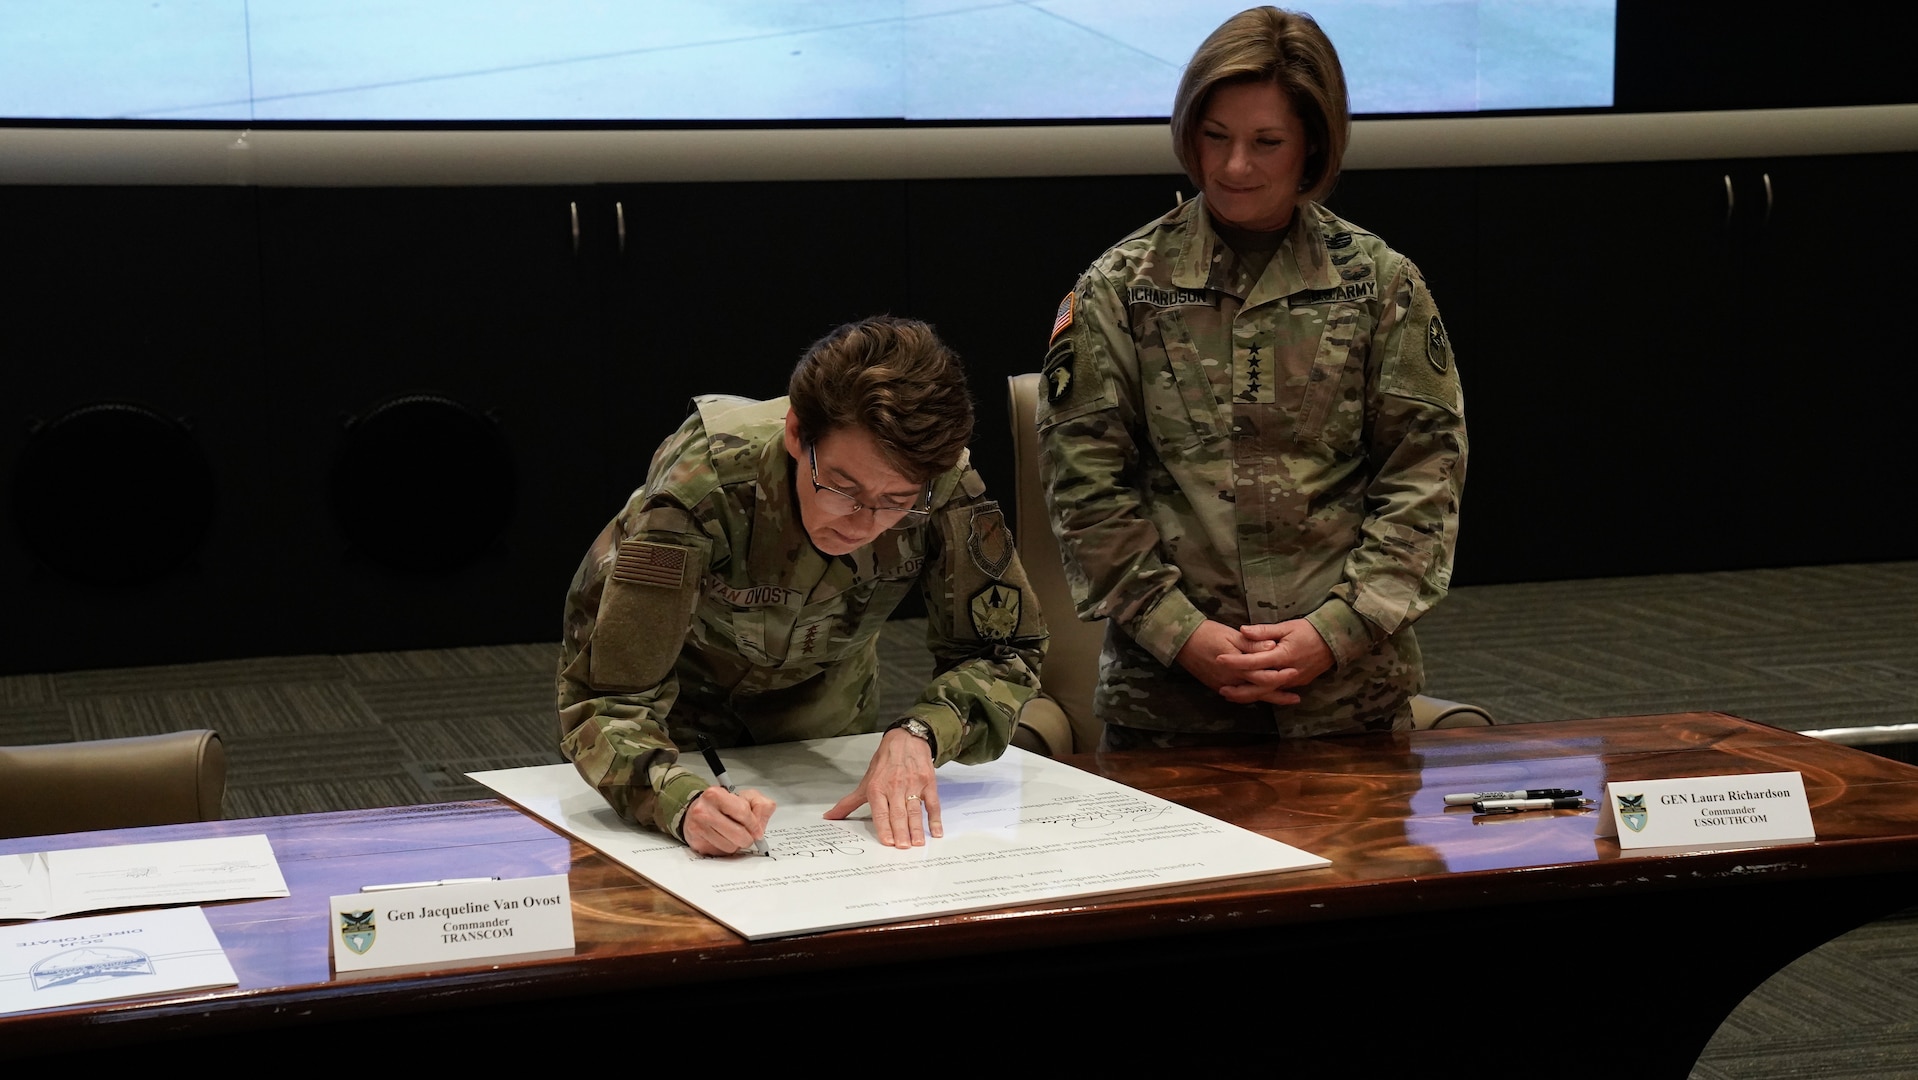 A woman signs a document as another woman looks on.